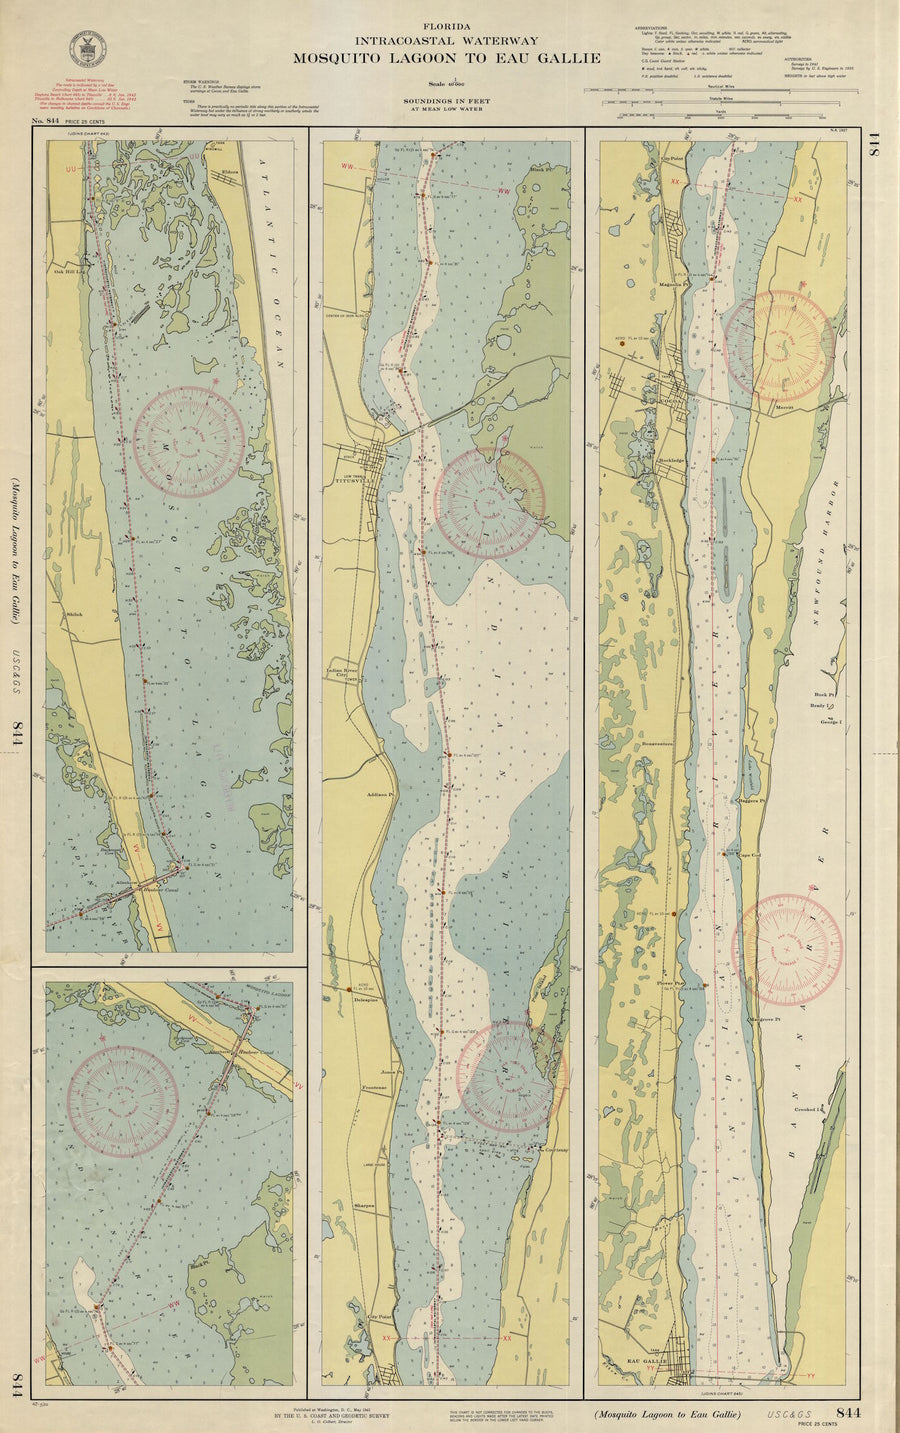 Mosquito Lagoon to Eau Gallie Map -1942